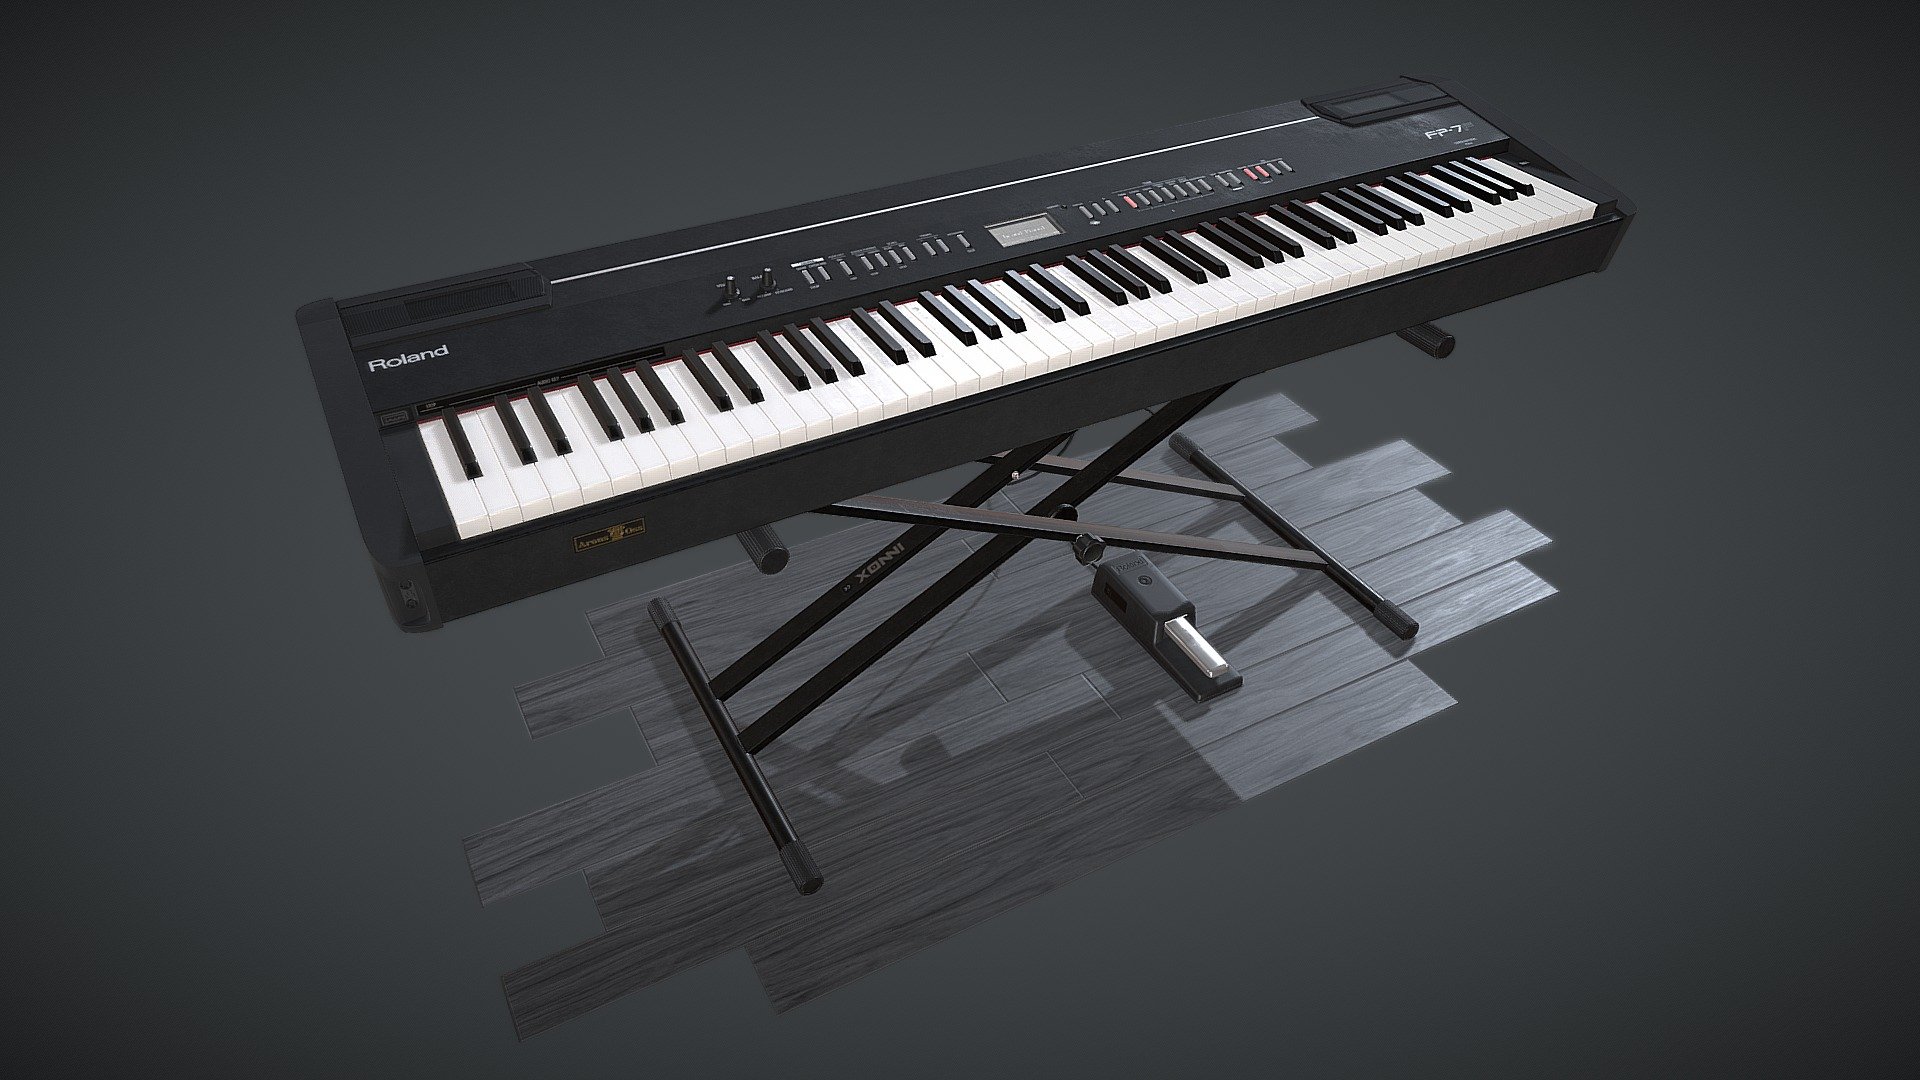 a model of my keyboard that i use at home - Keyboard - 3D model by FrequentlyGreen 3d model